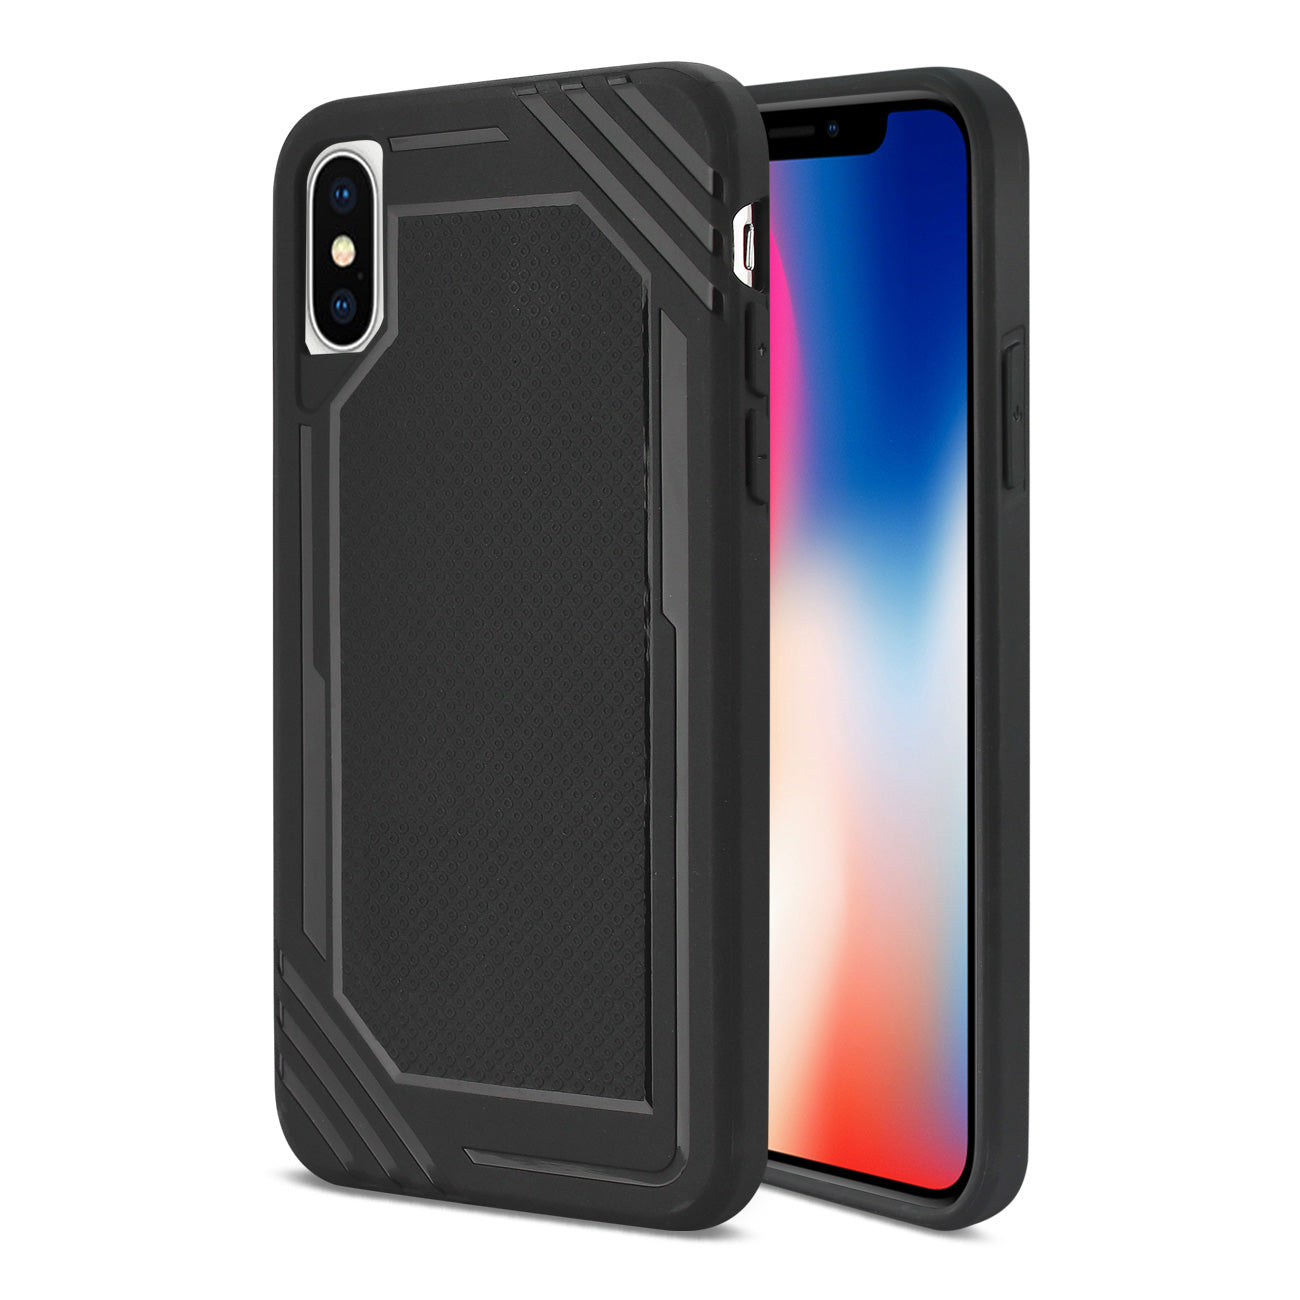 iPhone X Slim-Fit Flexible Soft TPU Strong Rubber Bumper Anti-Slip Grip Protective Armor in Black